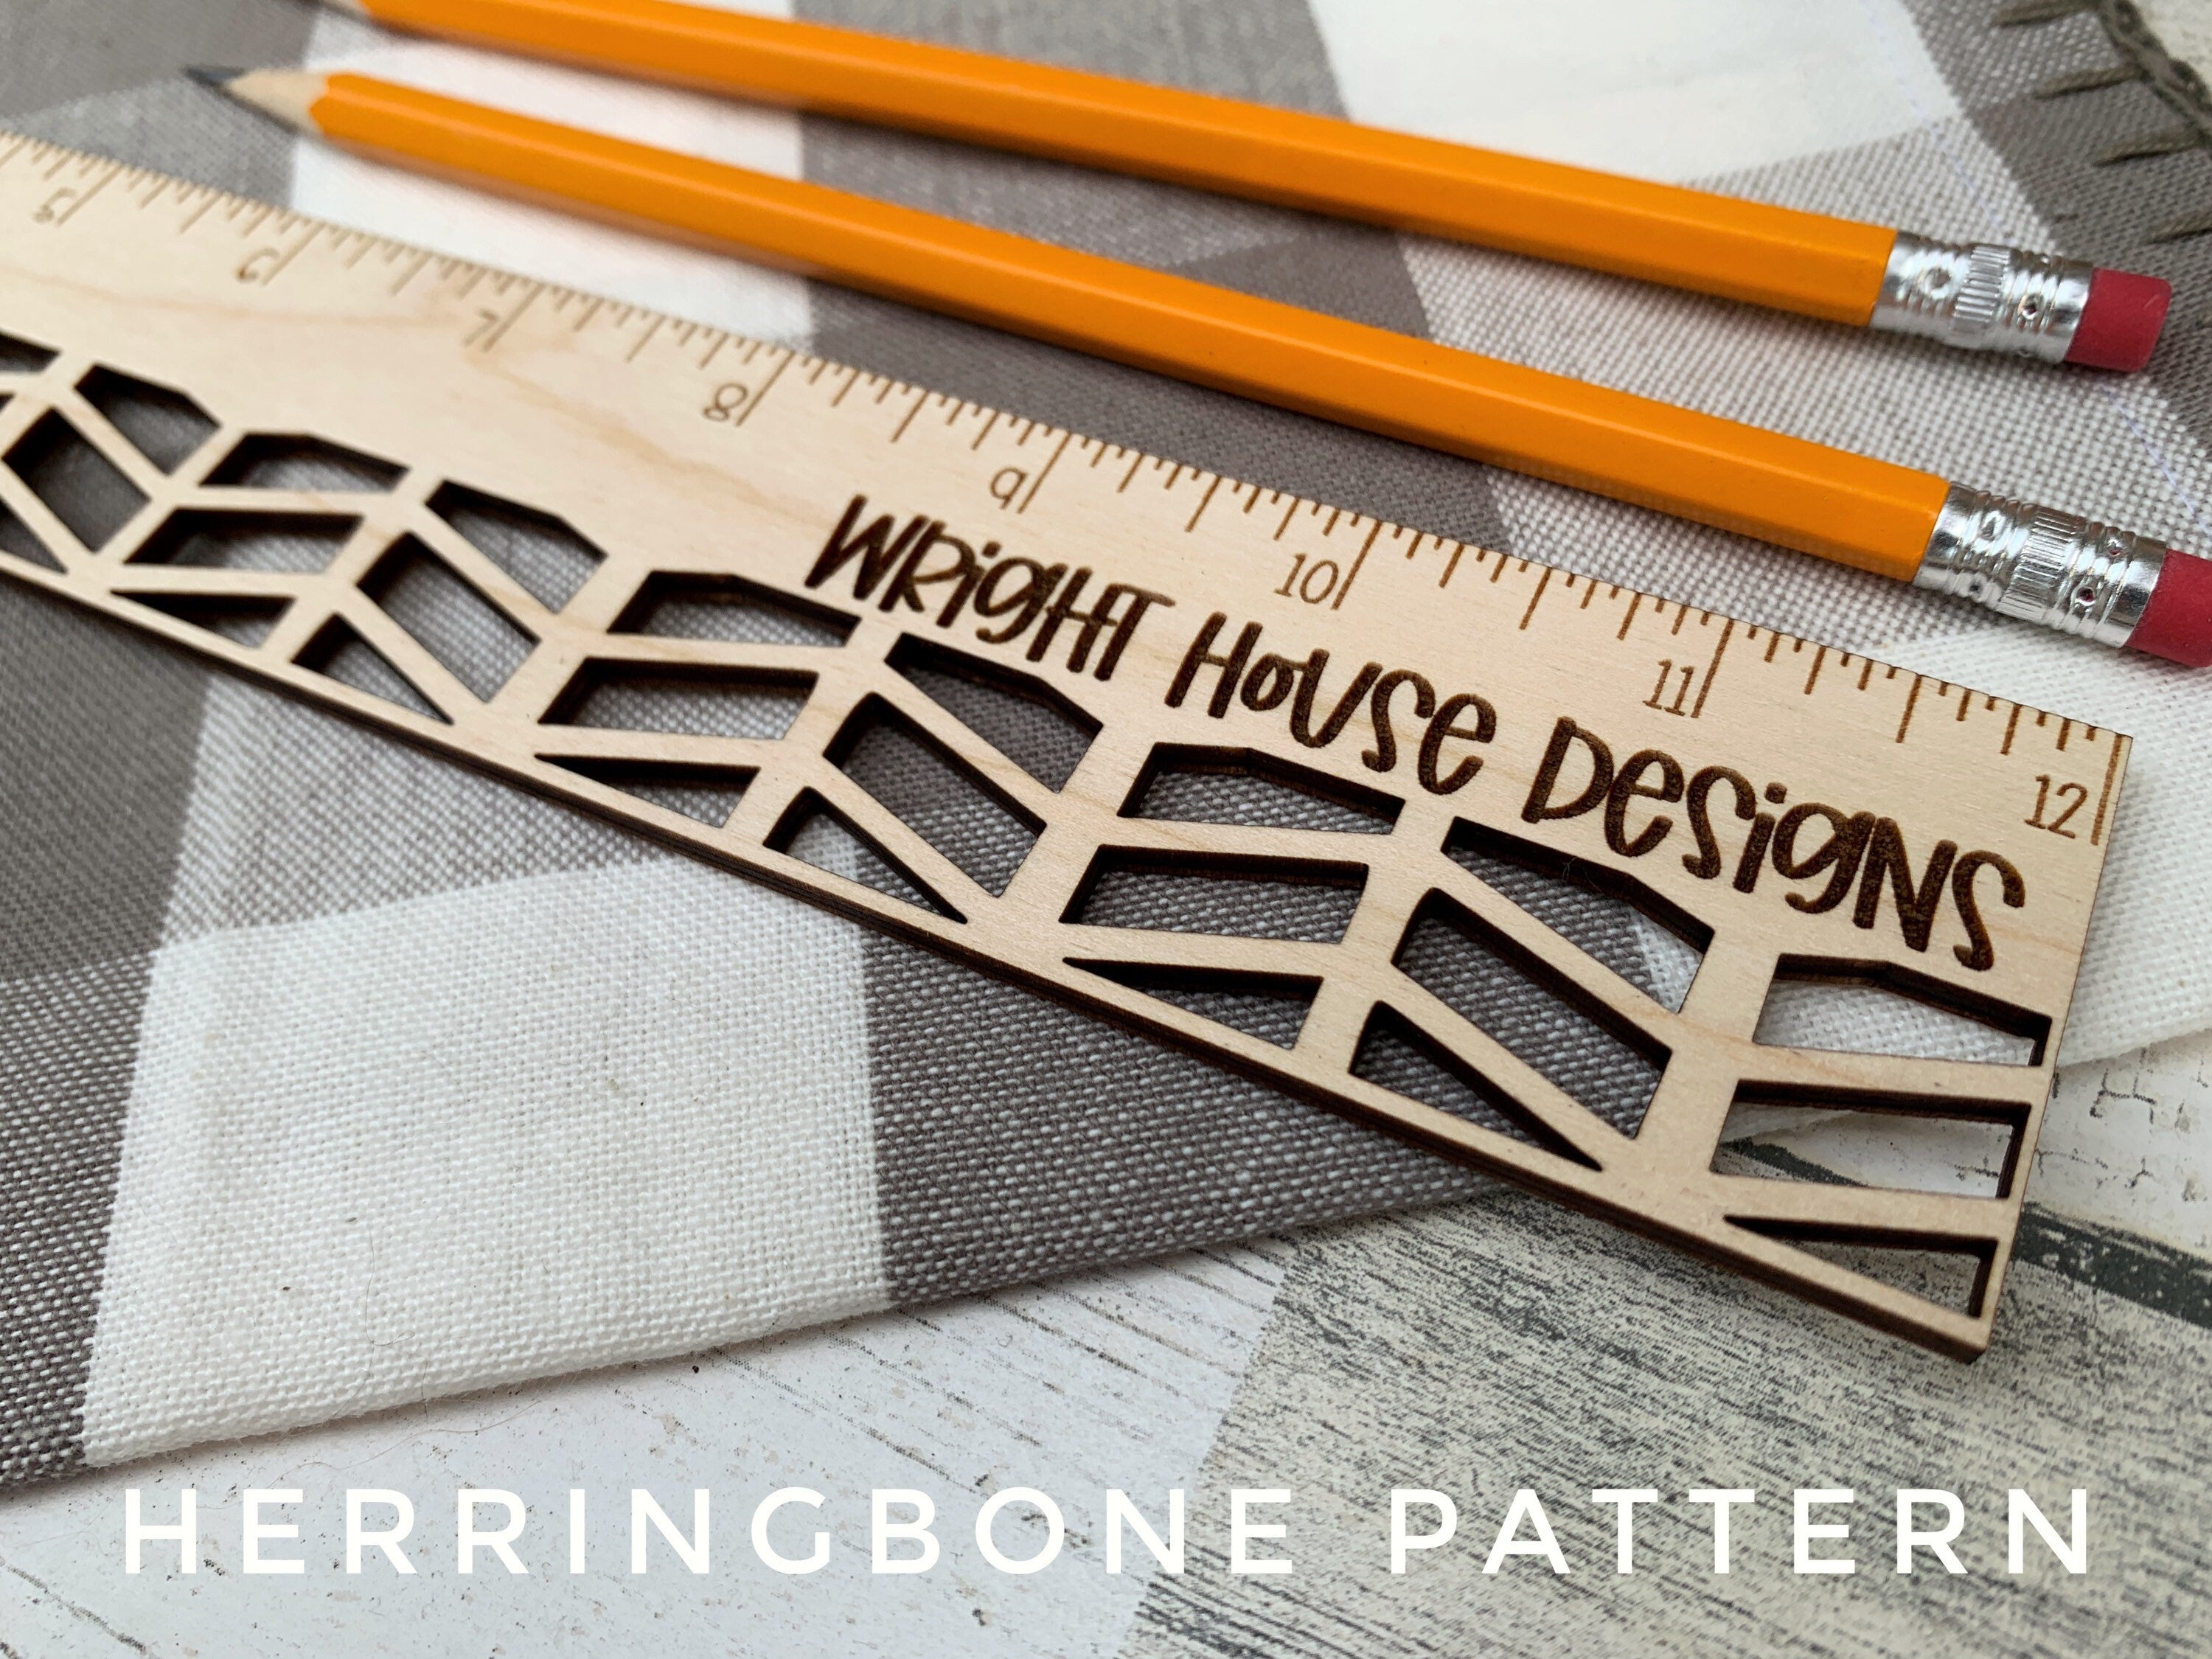 Wooden Laser Engraved Standard Ruler - Geometric Decorative Pattern - Personalized School and Office Supplies - Small Business Branding Tool